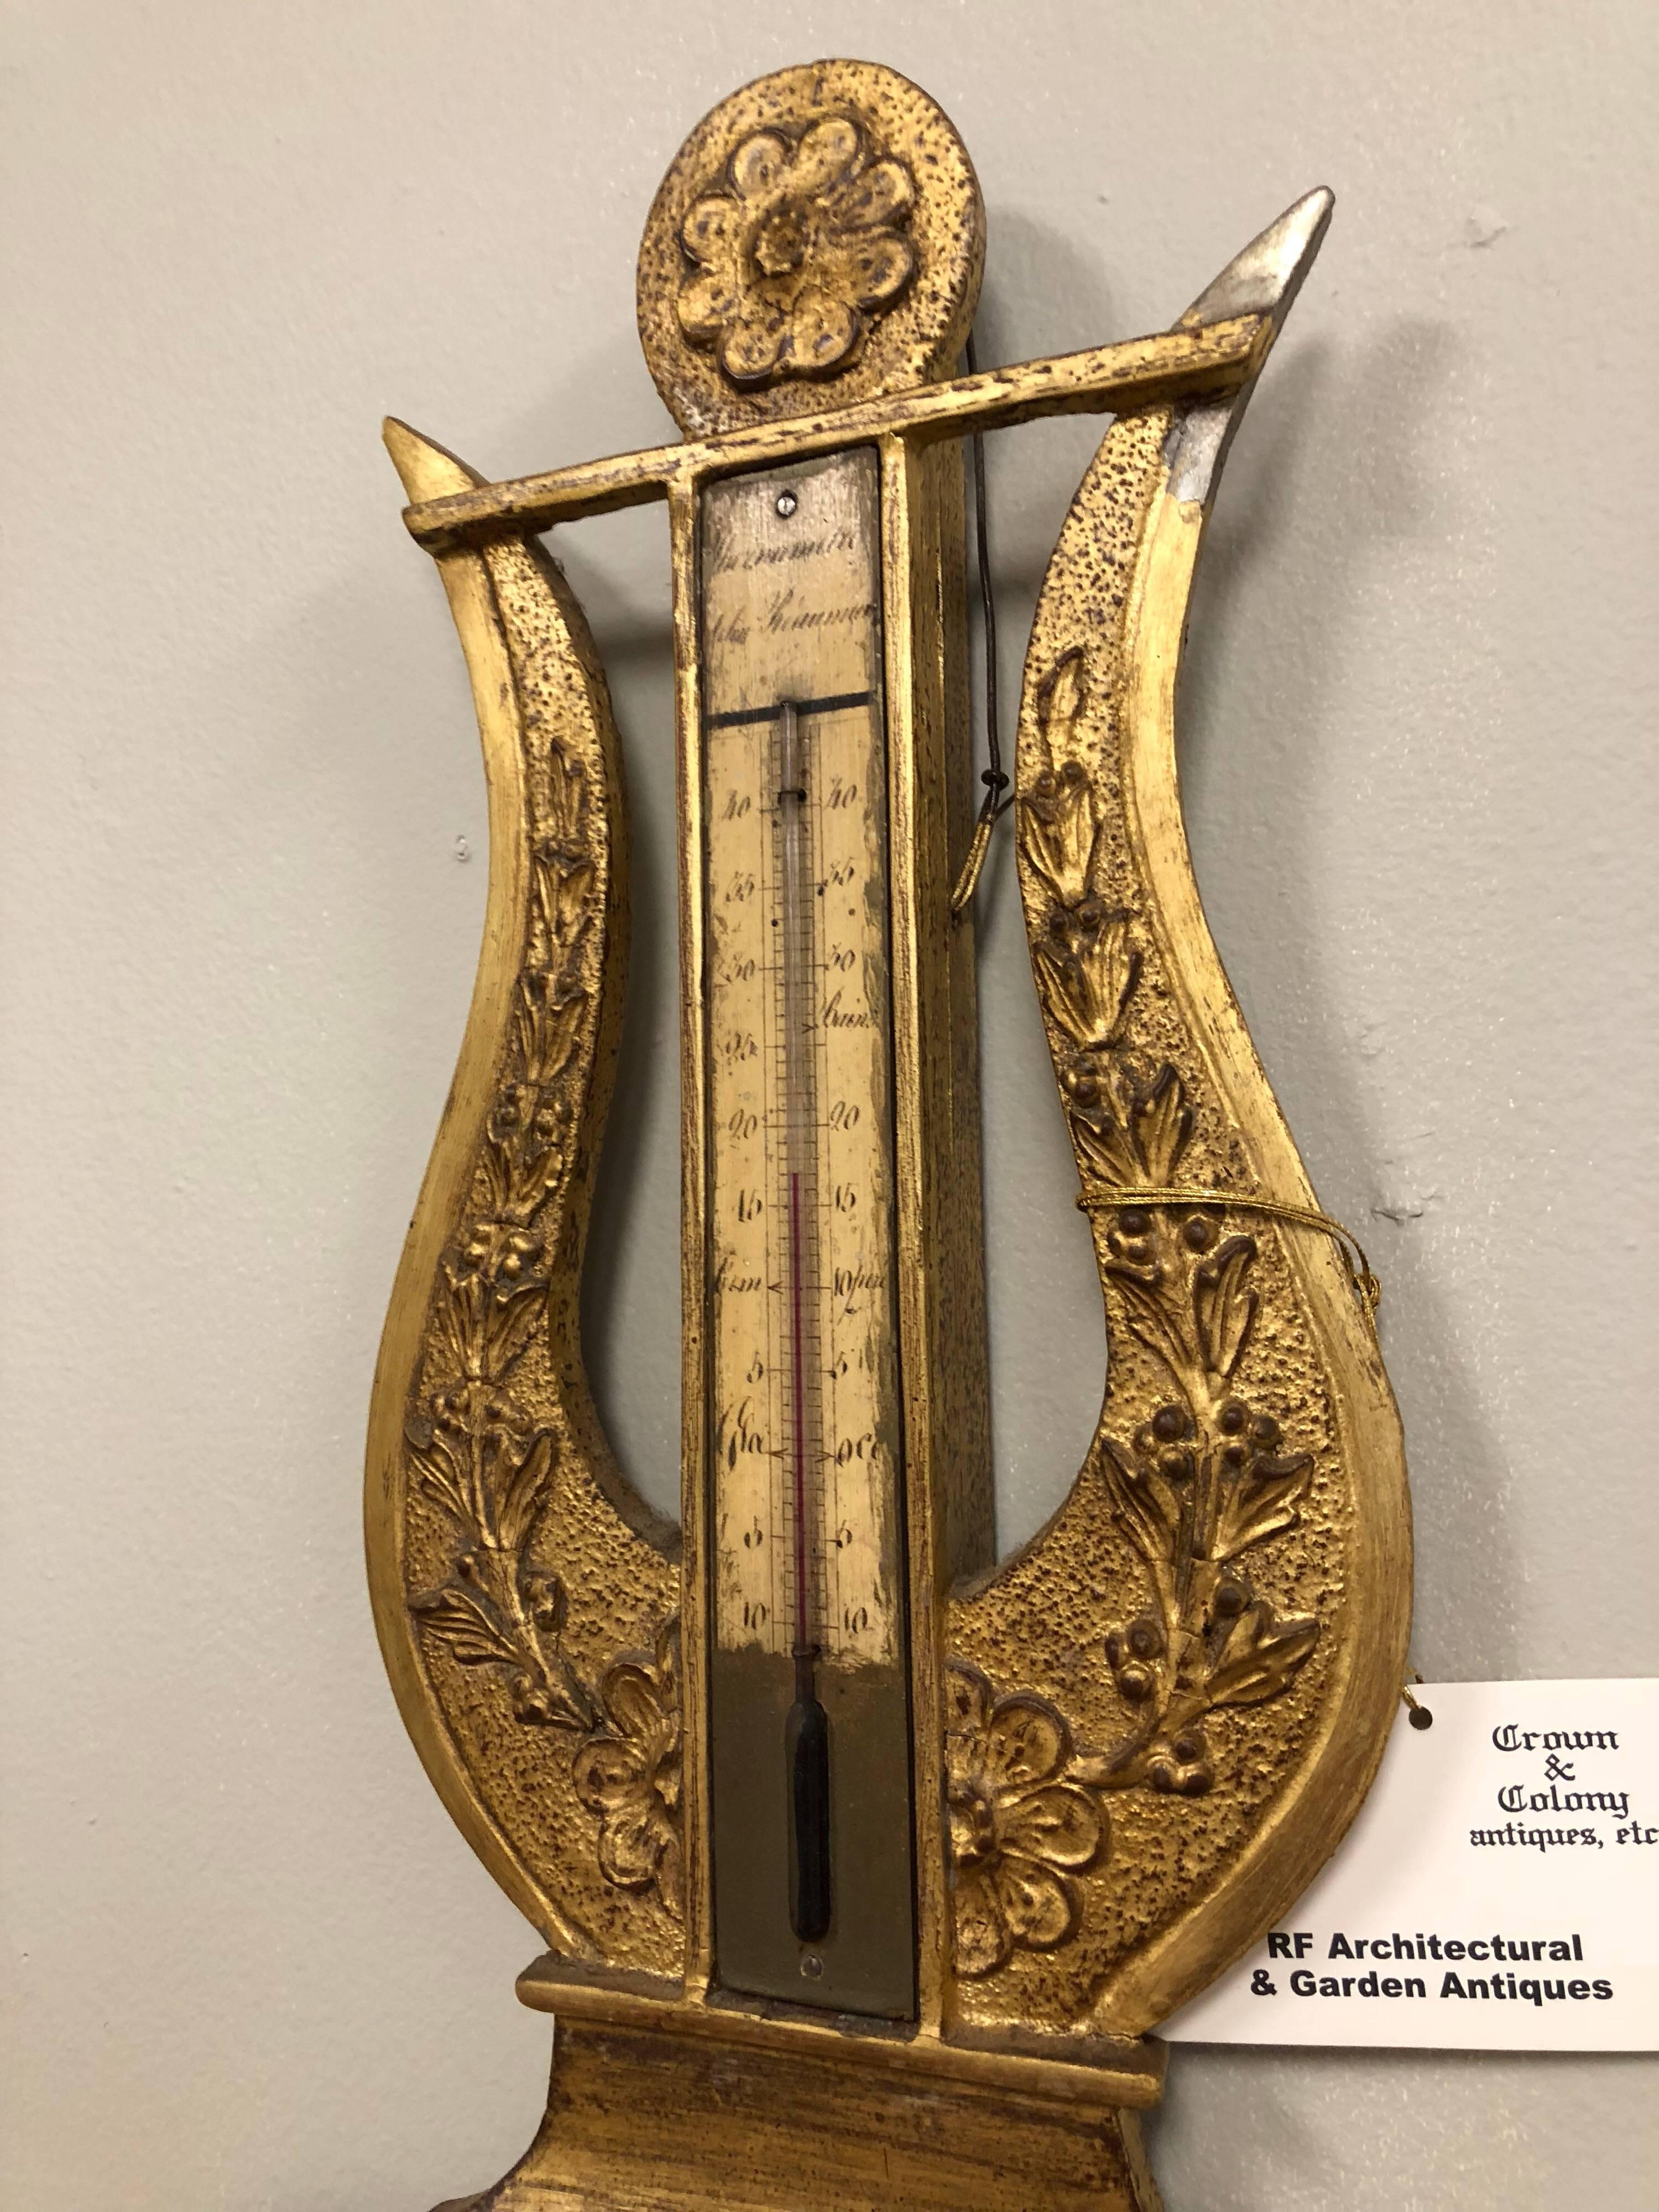 French Empire giltwood barometer or thermometer with lyre form over a octagonal shape.